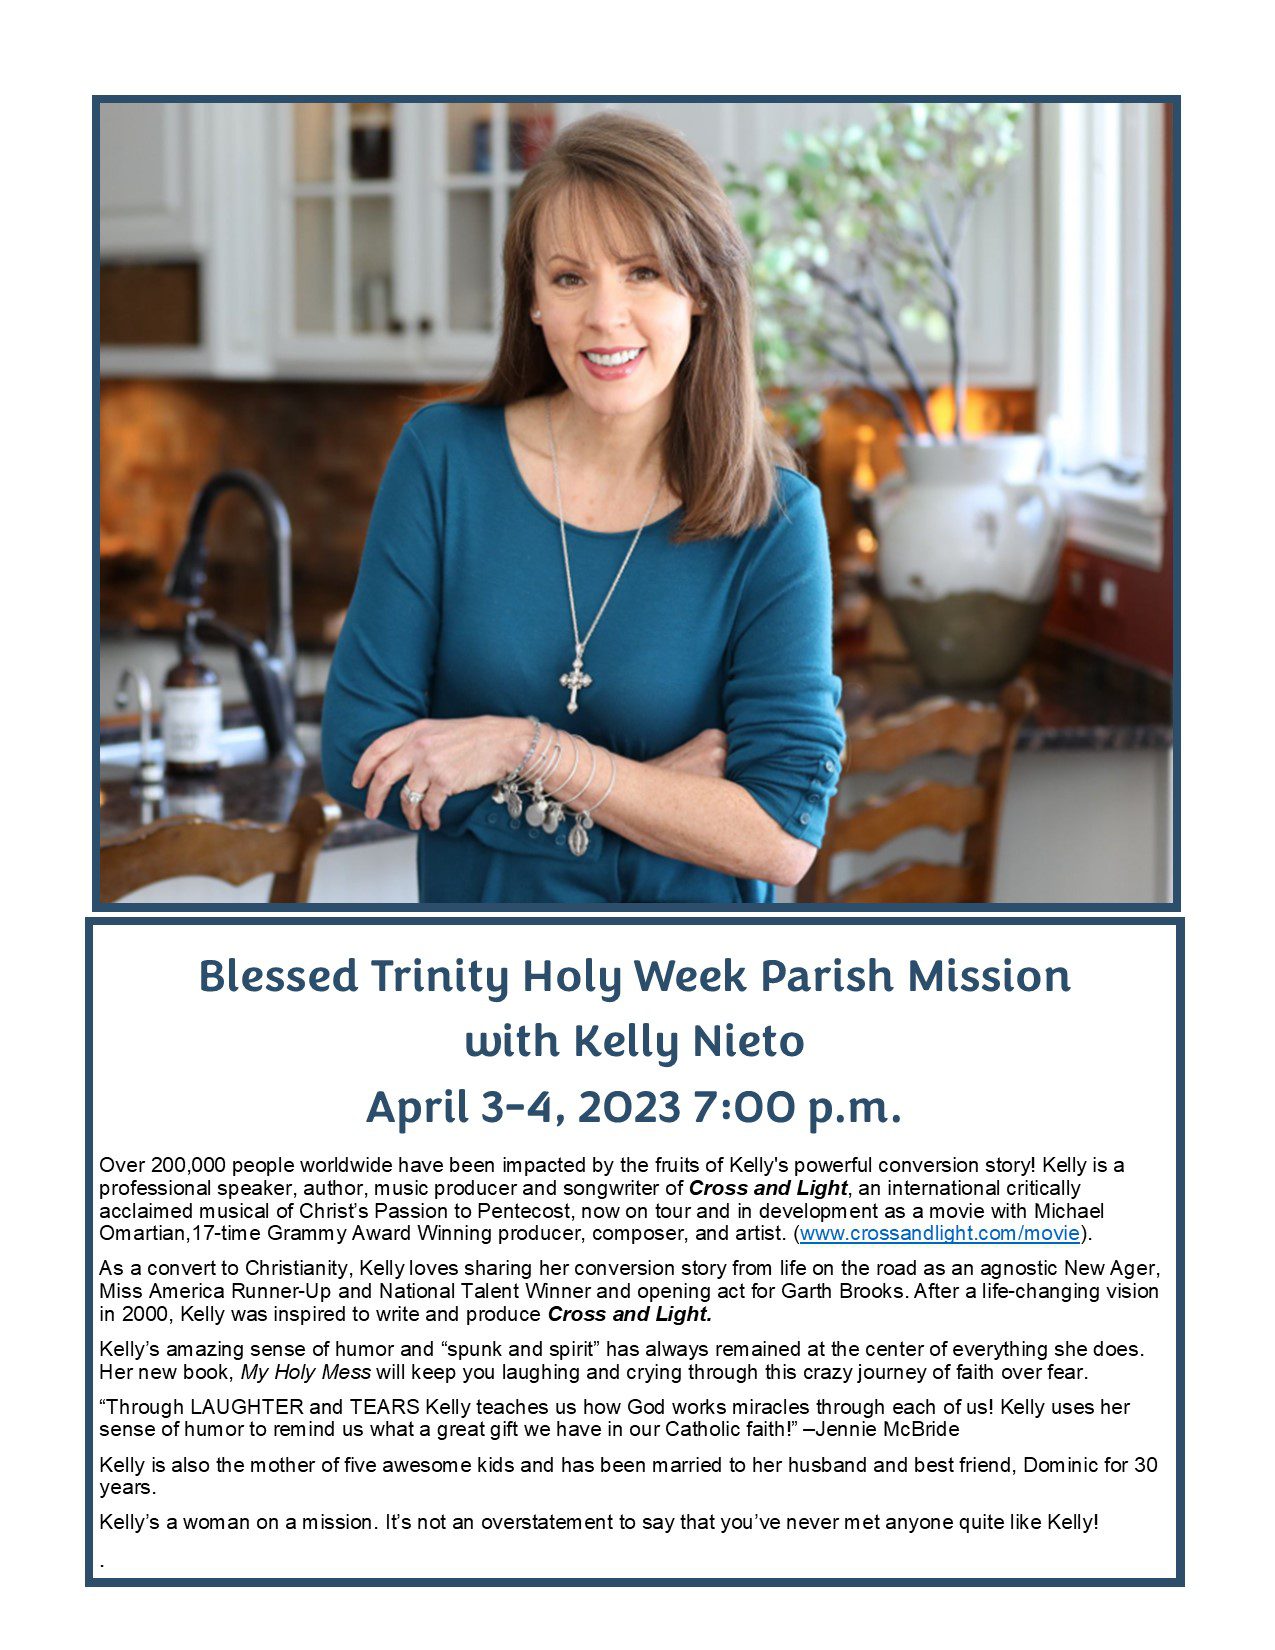 Save the Date for our Holy Week Parish Mission April 3-4, 2023